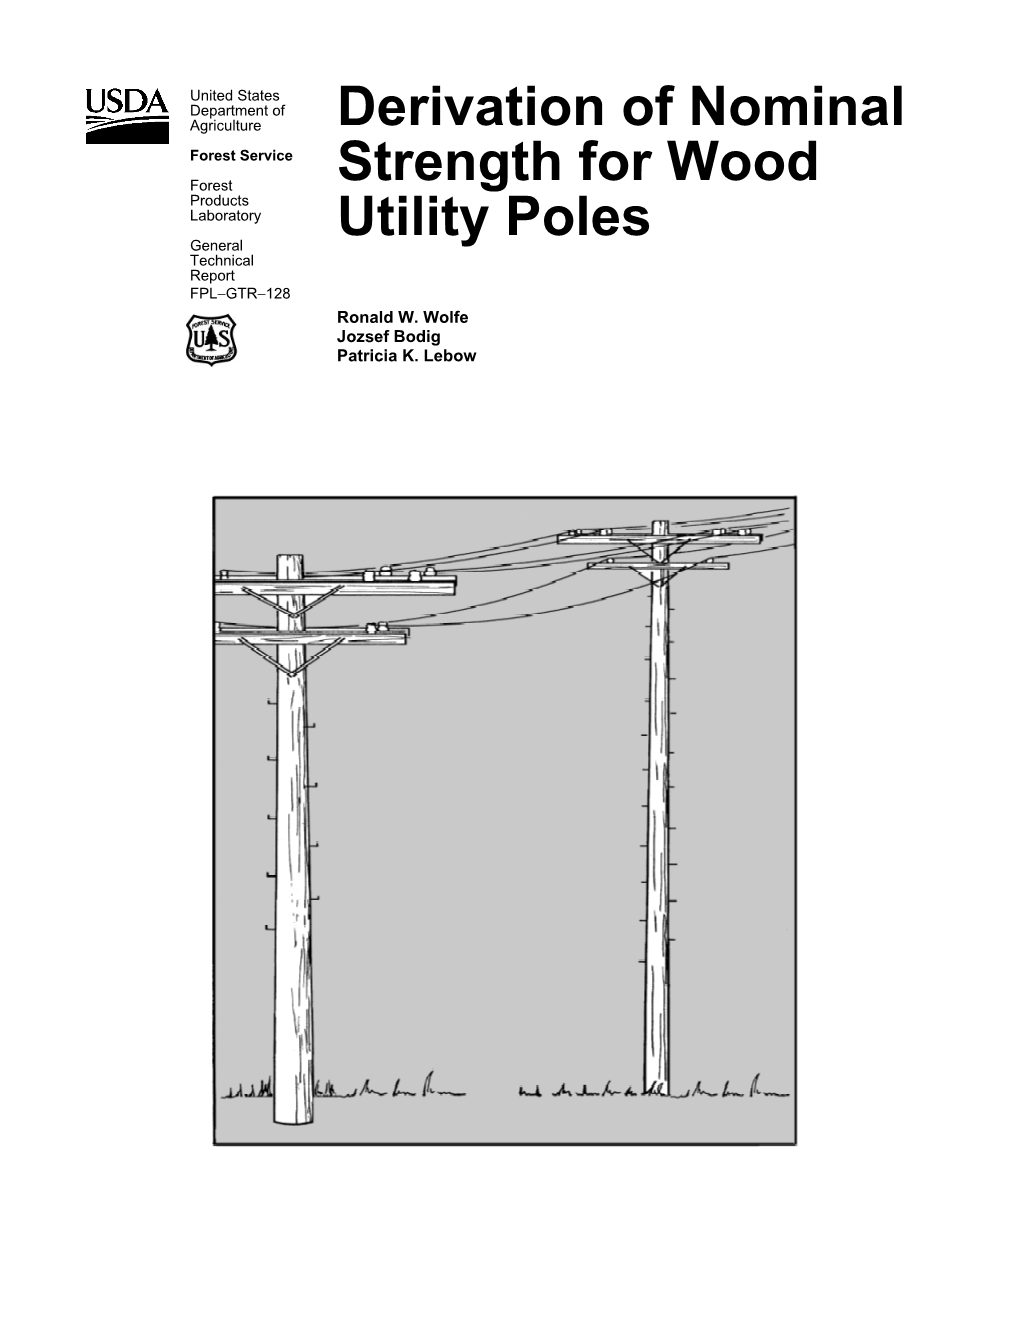 Derivation of Nominal Strength for Wood Utility Poles